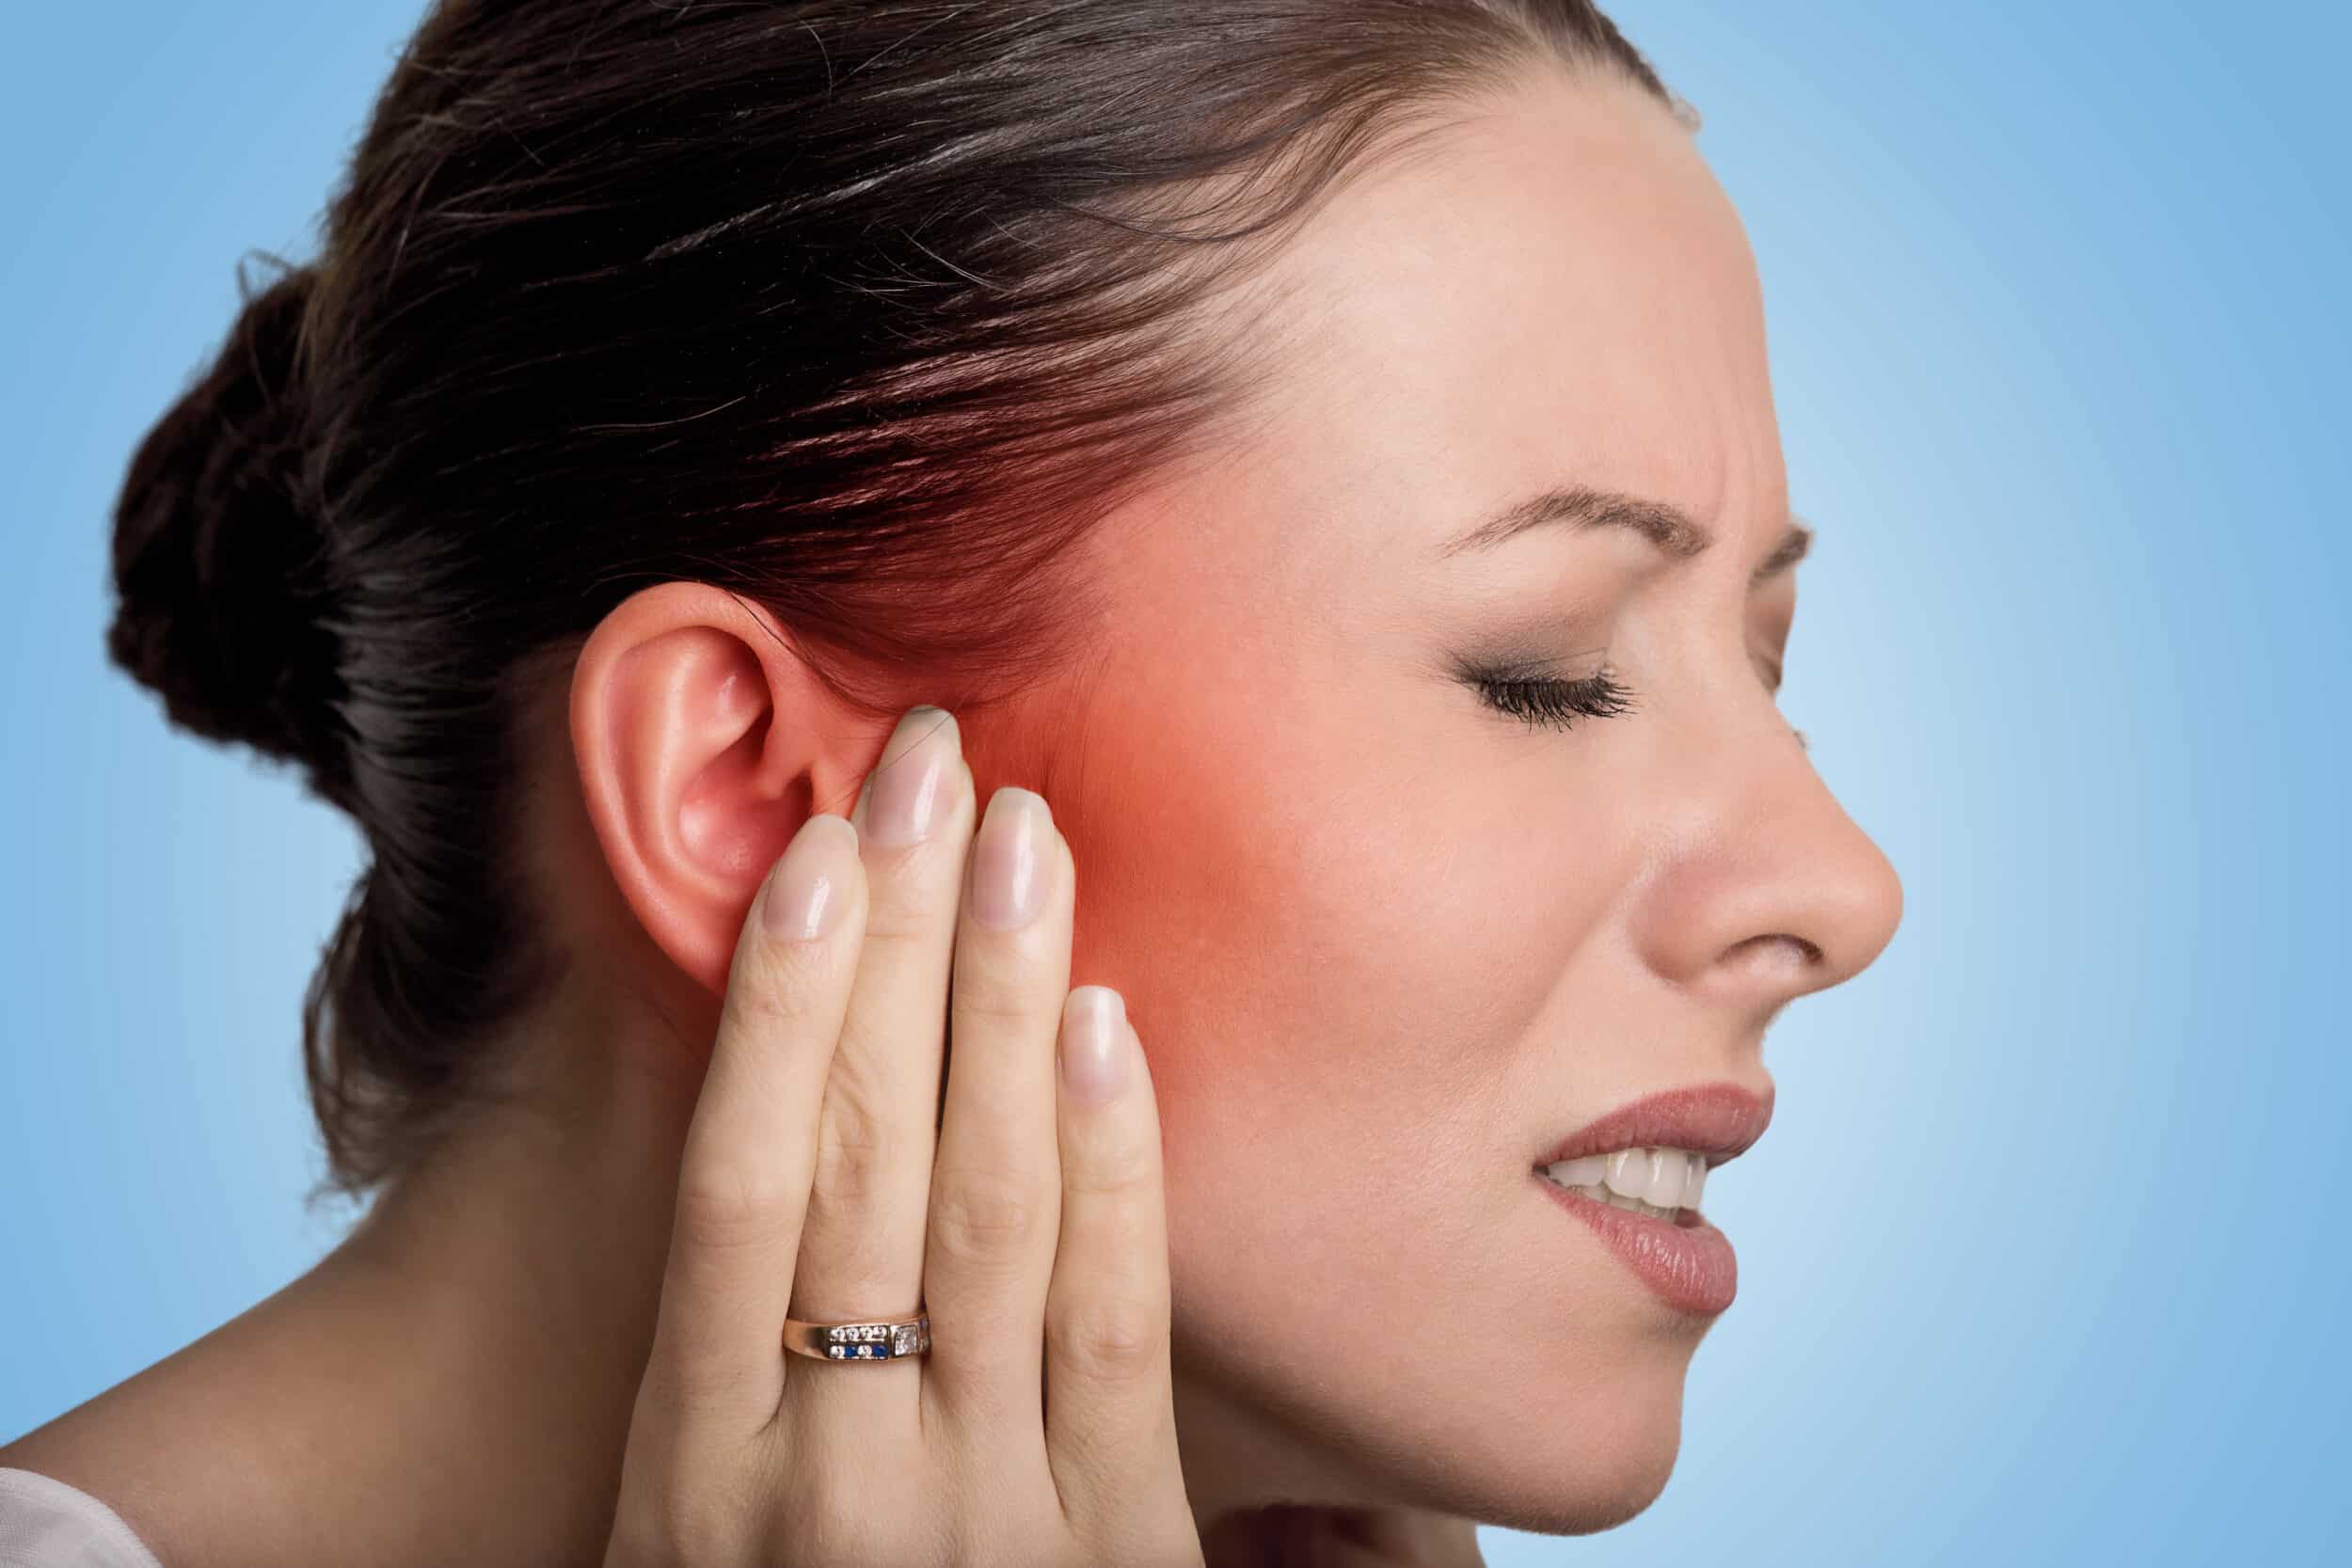 A close-up profile shot of a woman holding her ear because of an ear condition